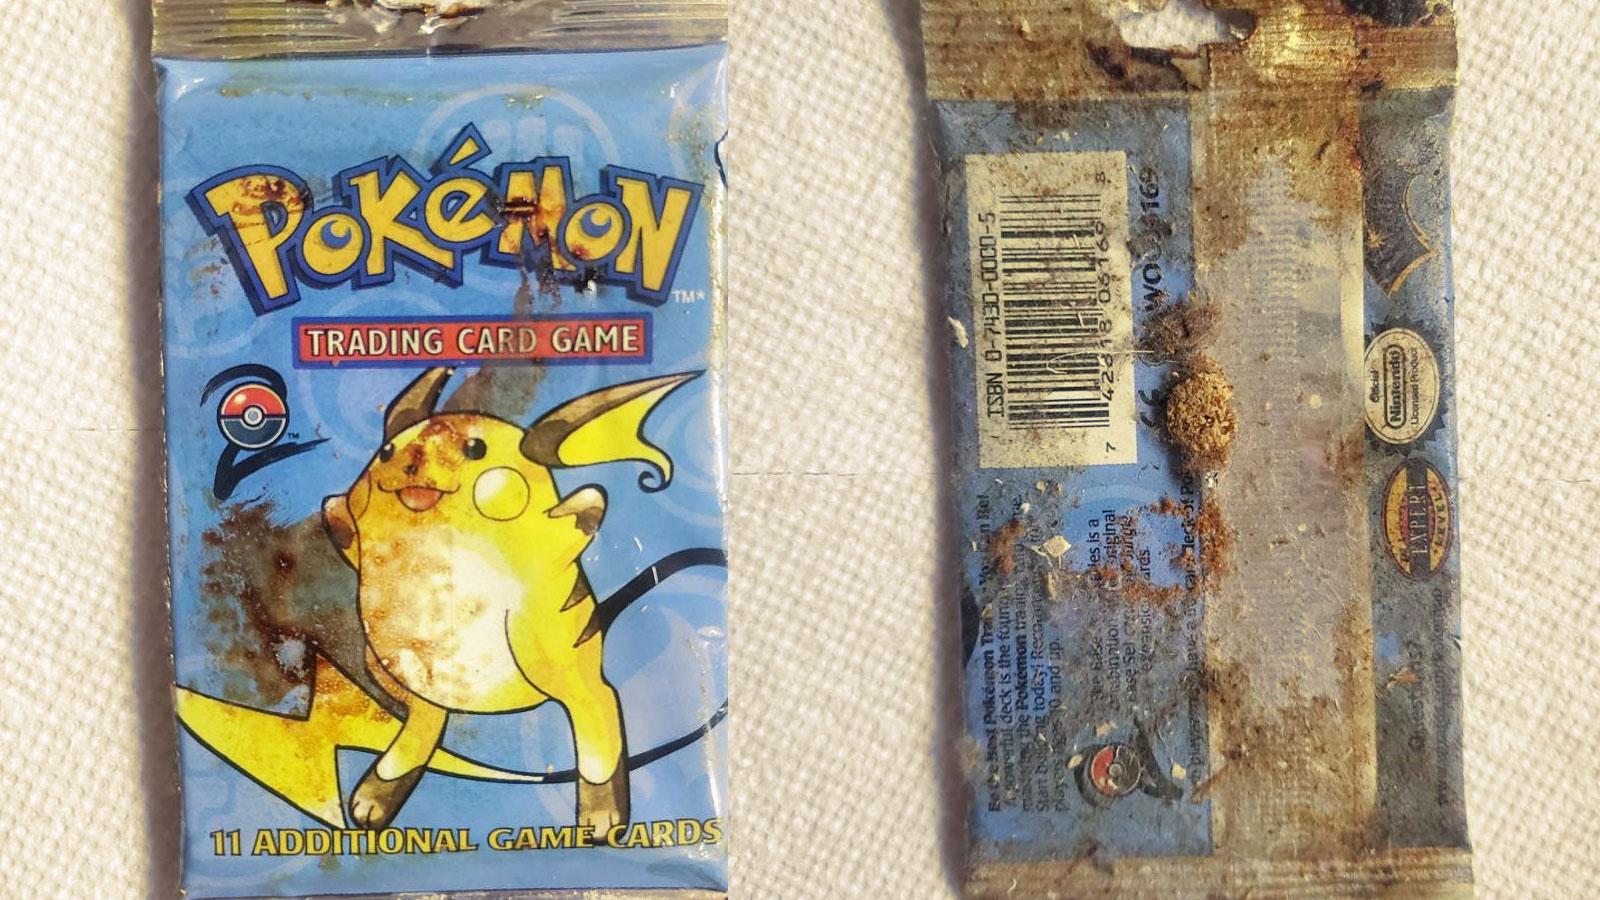 Pokemon fan finds 20 year old TCG booster pack under Target